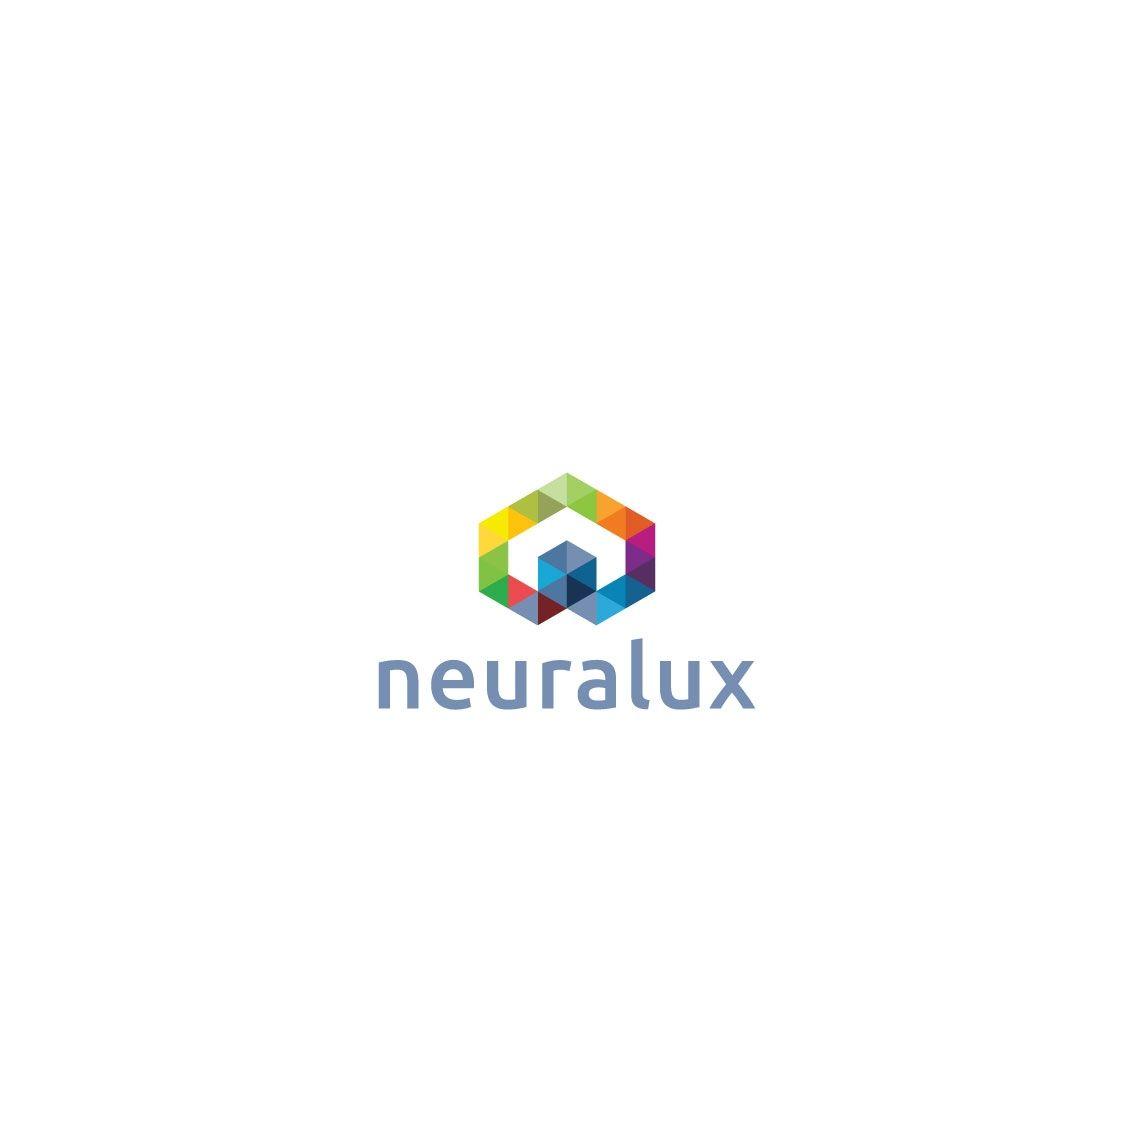 Generic Software Logo - Generic and overused logo designs sold - Neuralux | software ...